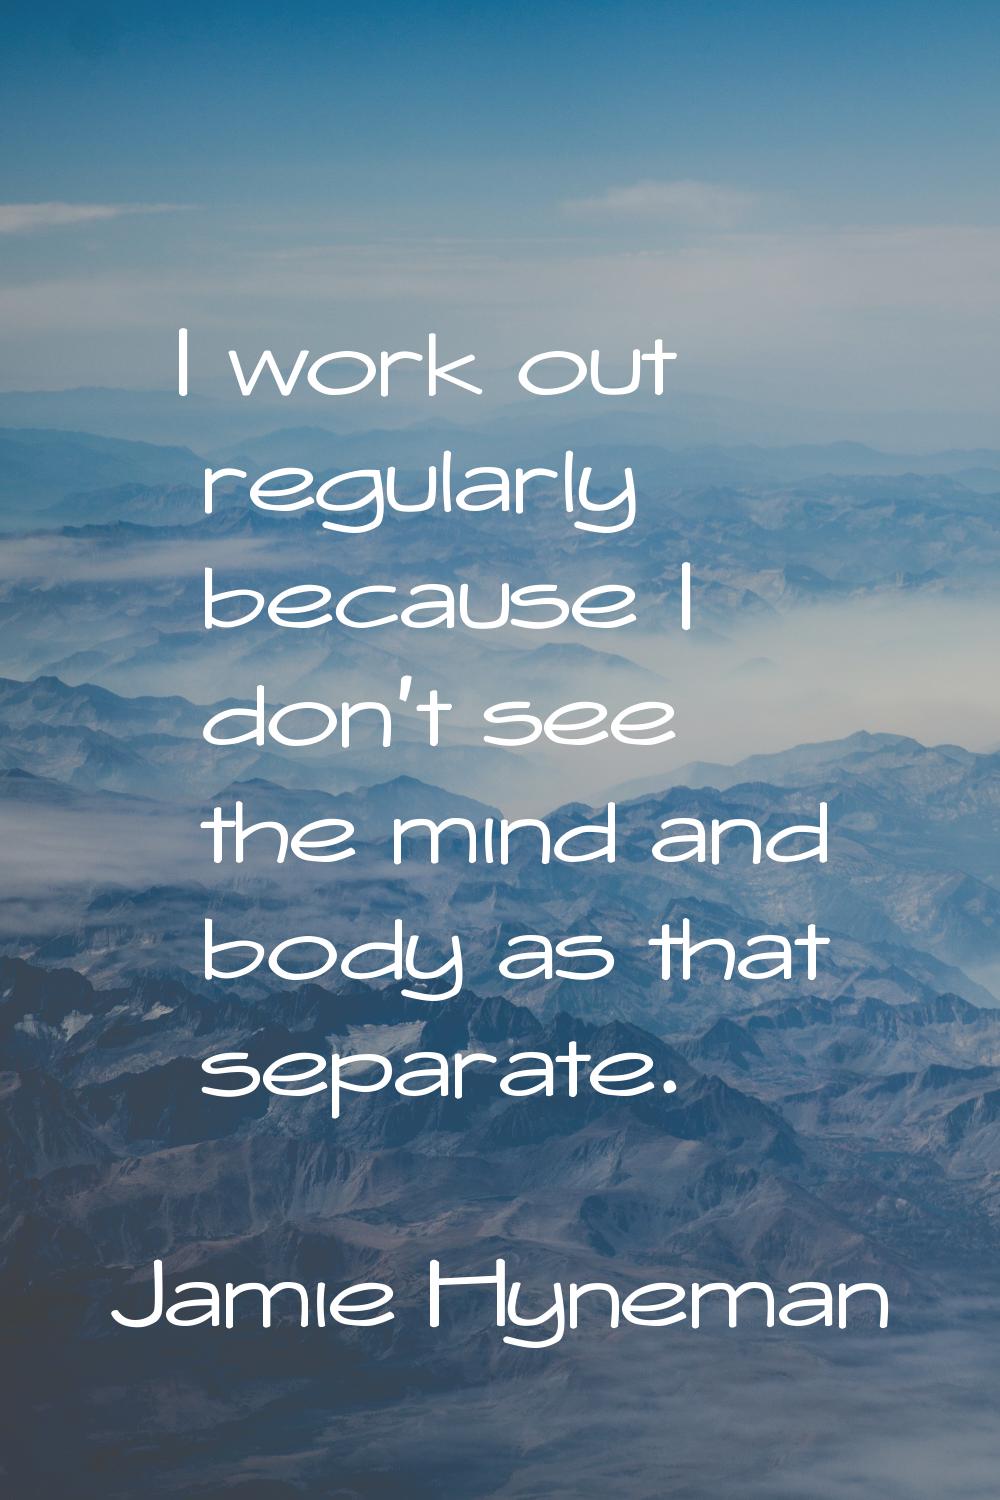 I work out regularly because I don't see the mind and body as that separate.